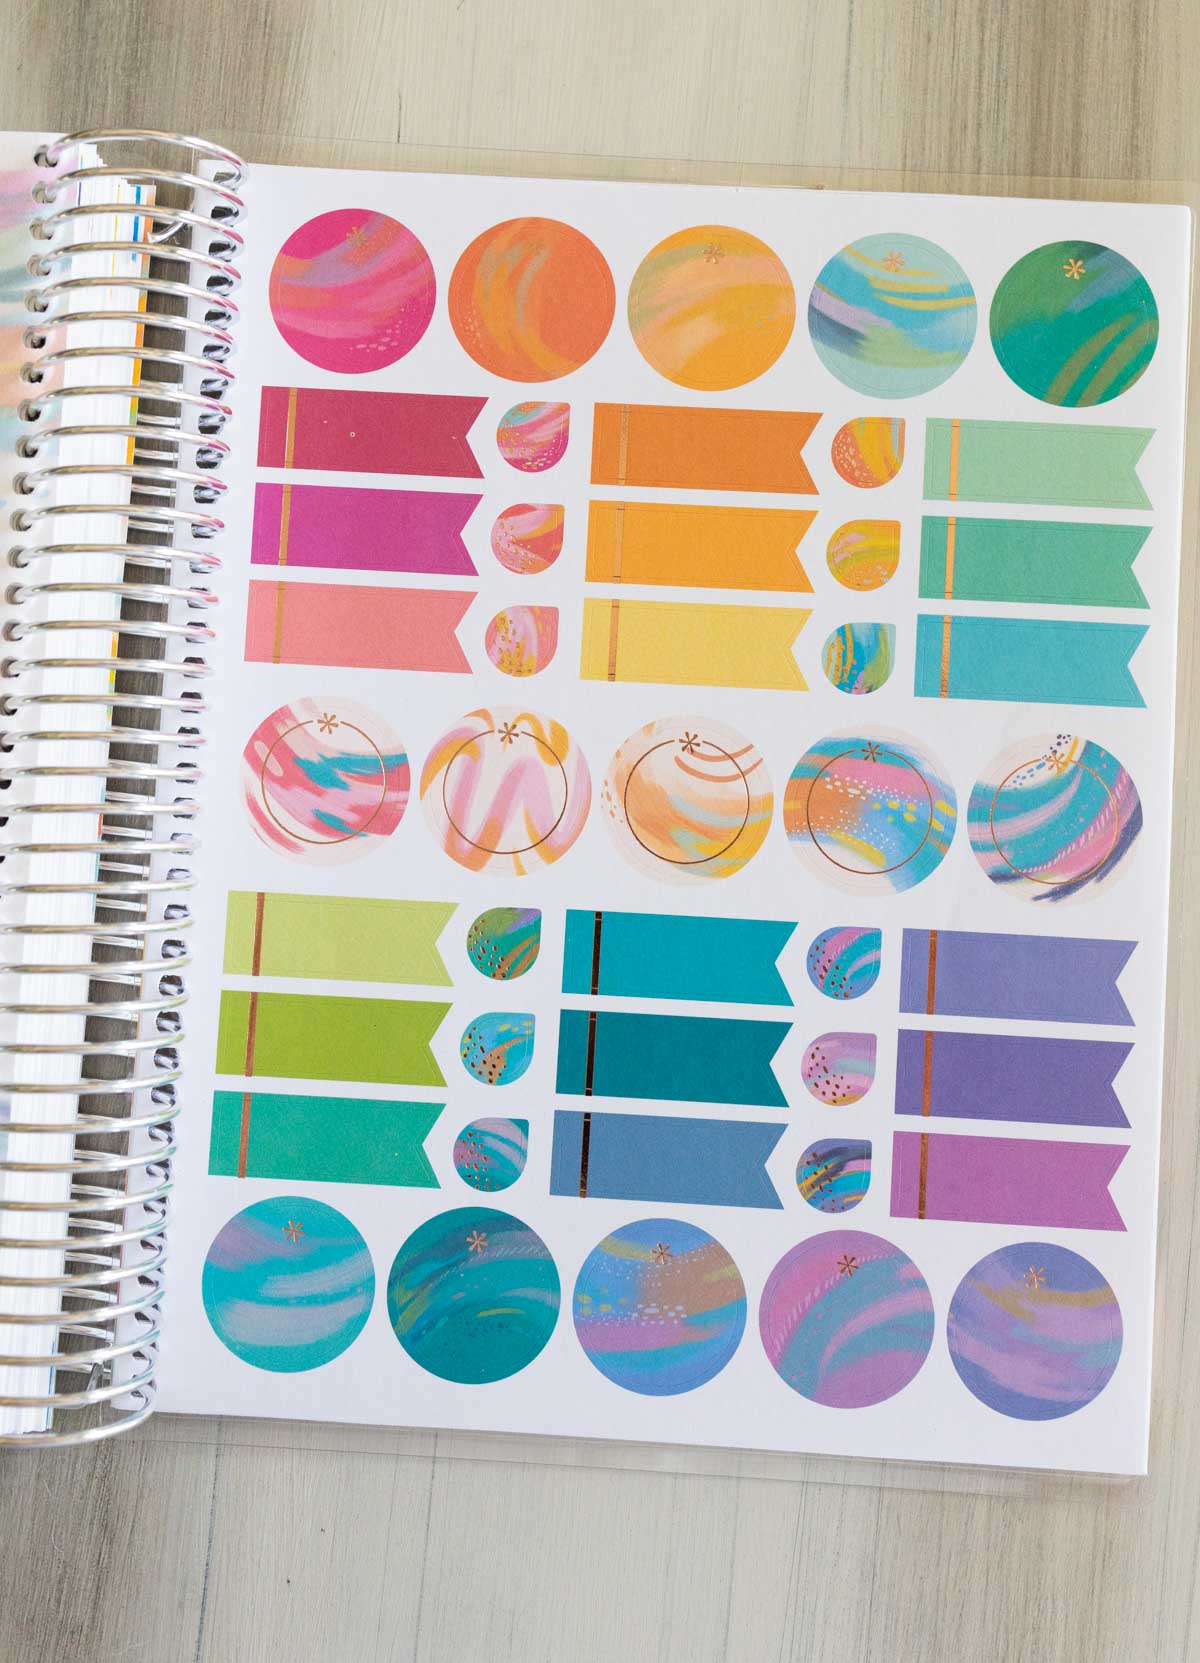 The colorful stickers included in the back of each planner.